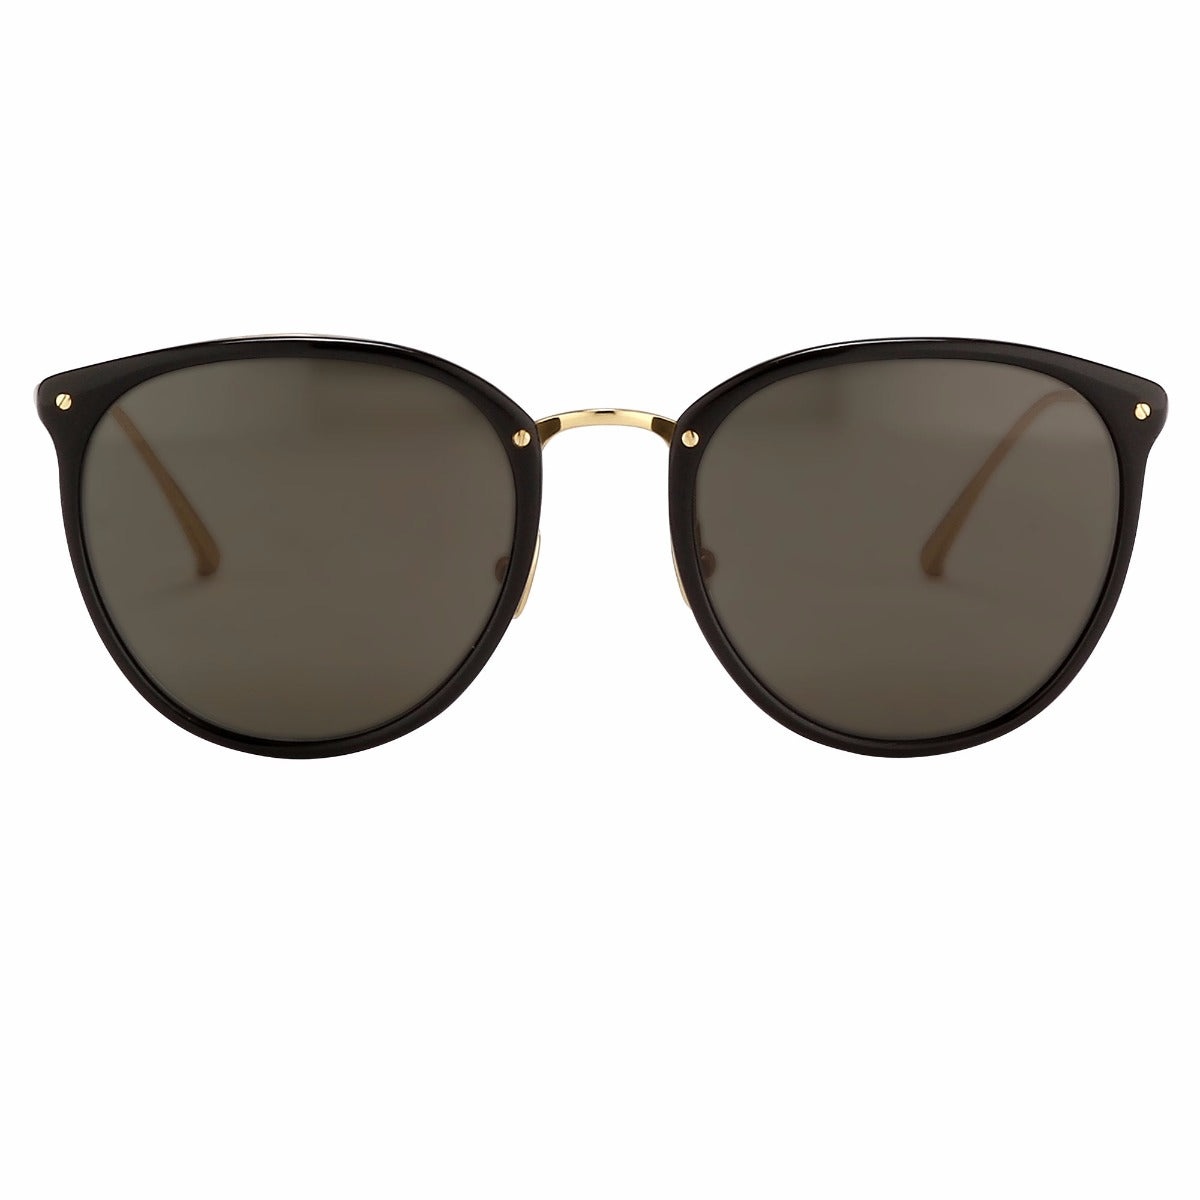 THE CALTHORPE | OVAL SUNGLASSES IN BLACK FRAME (C13) - 1